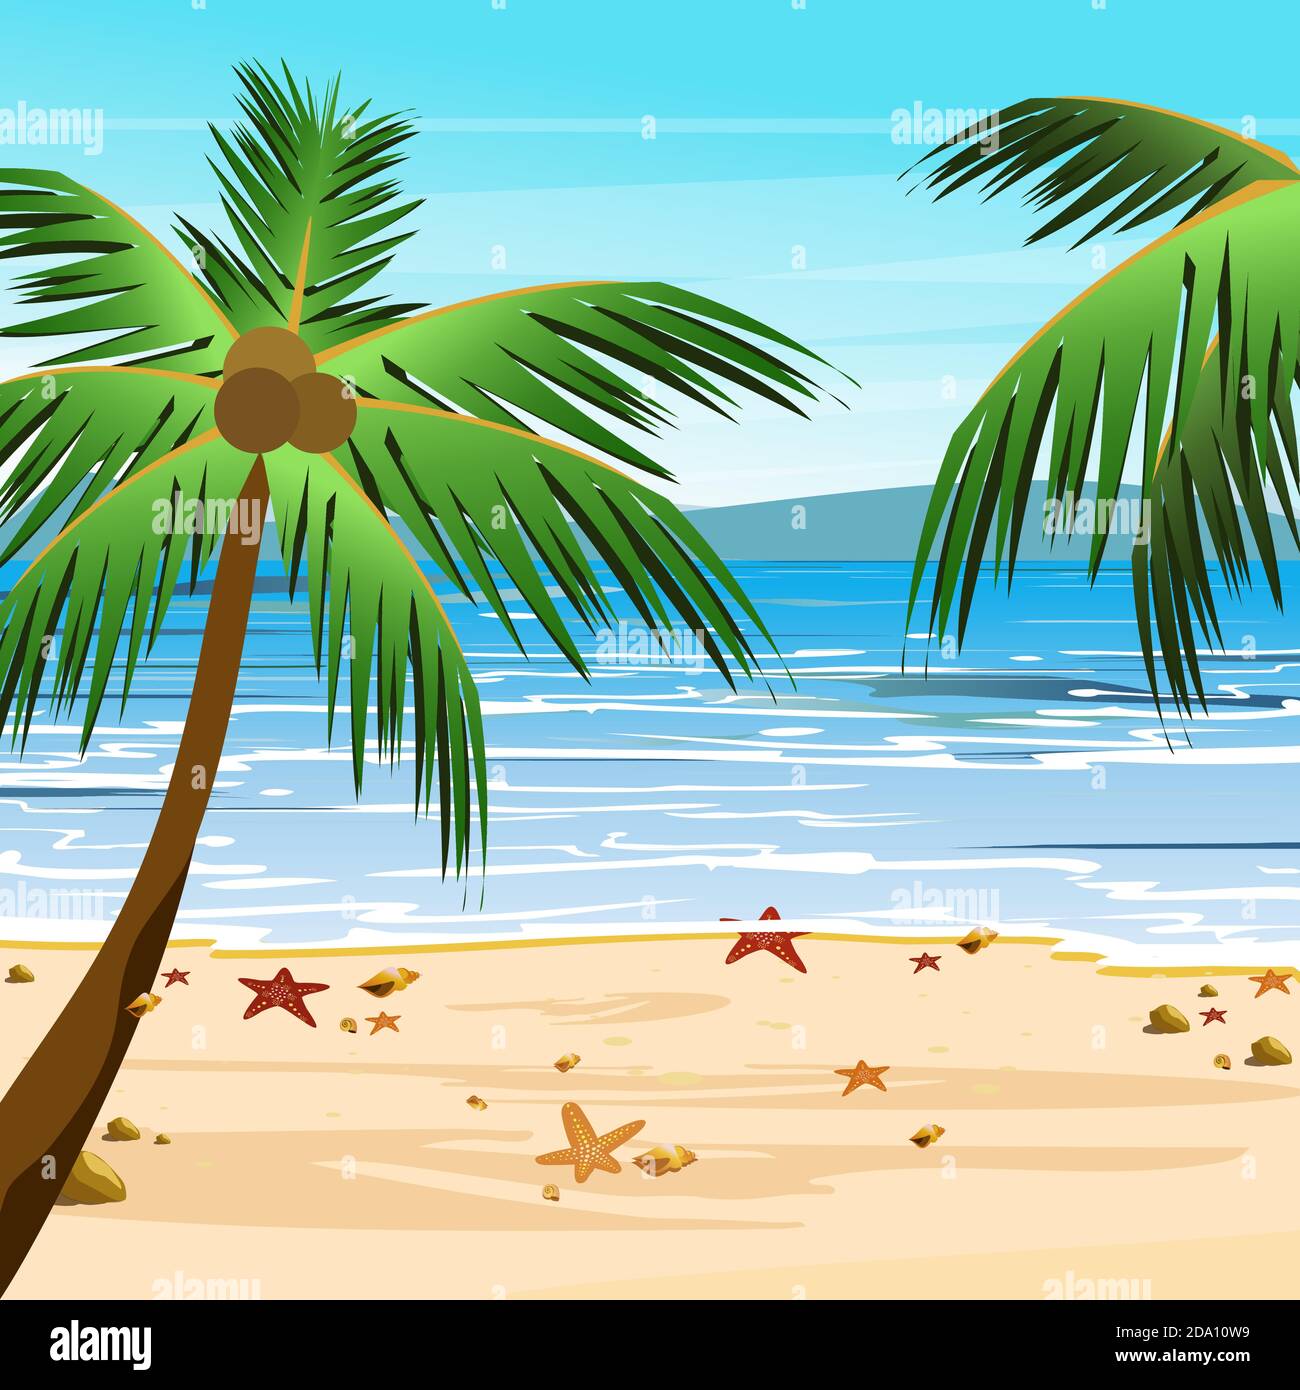 Vector illustration of beach with palms, sand, blue ocean water and sky. Summer tropical view in cartoon flat style. Stock Vector